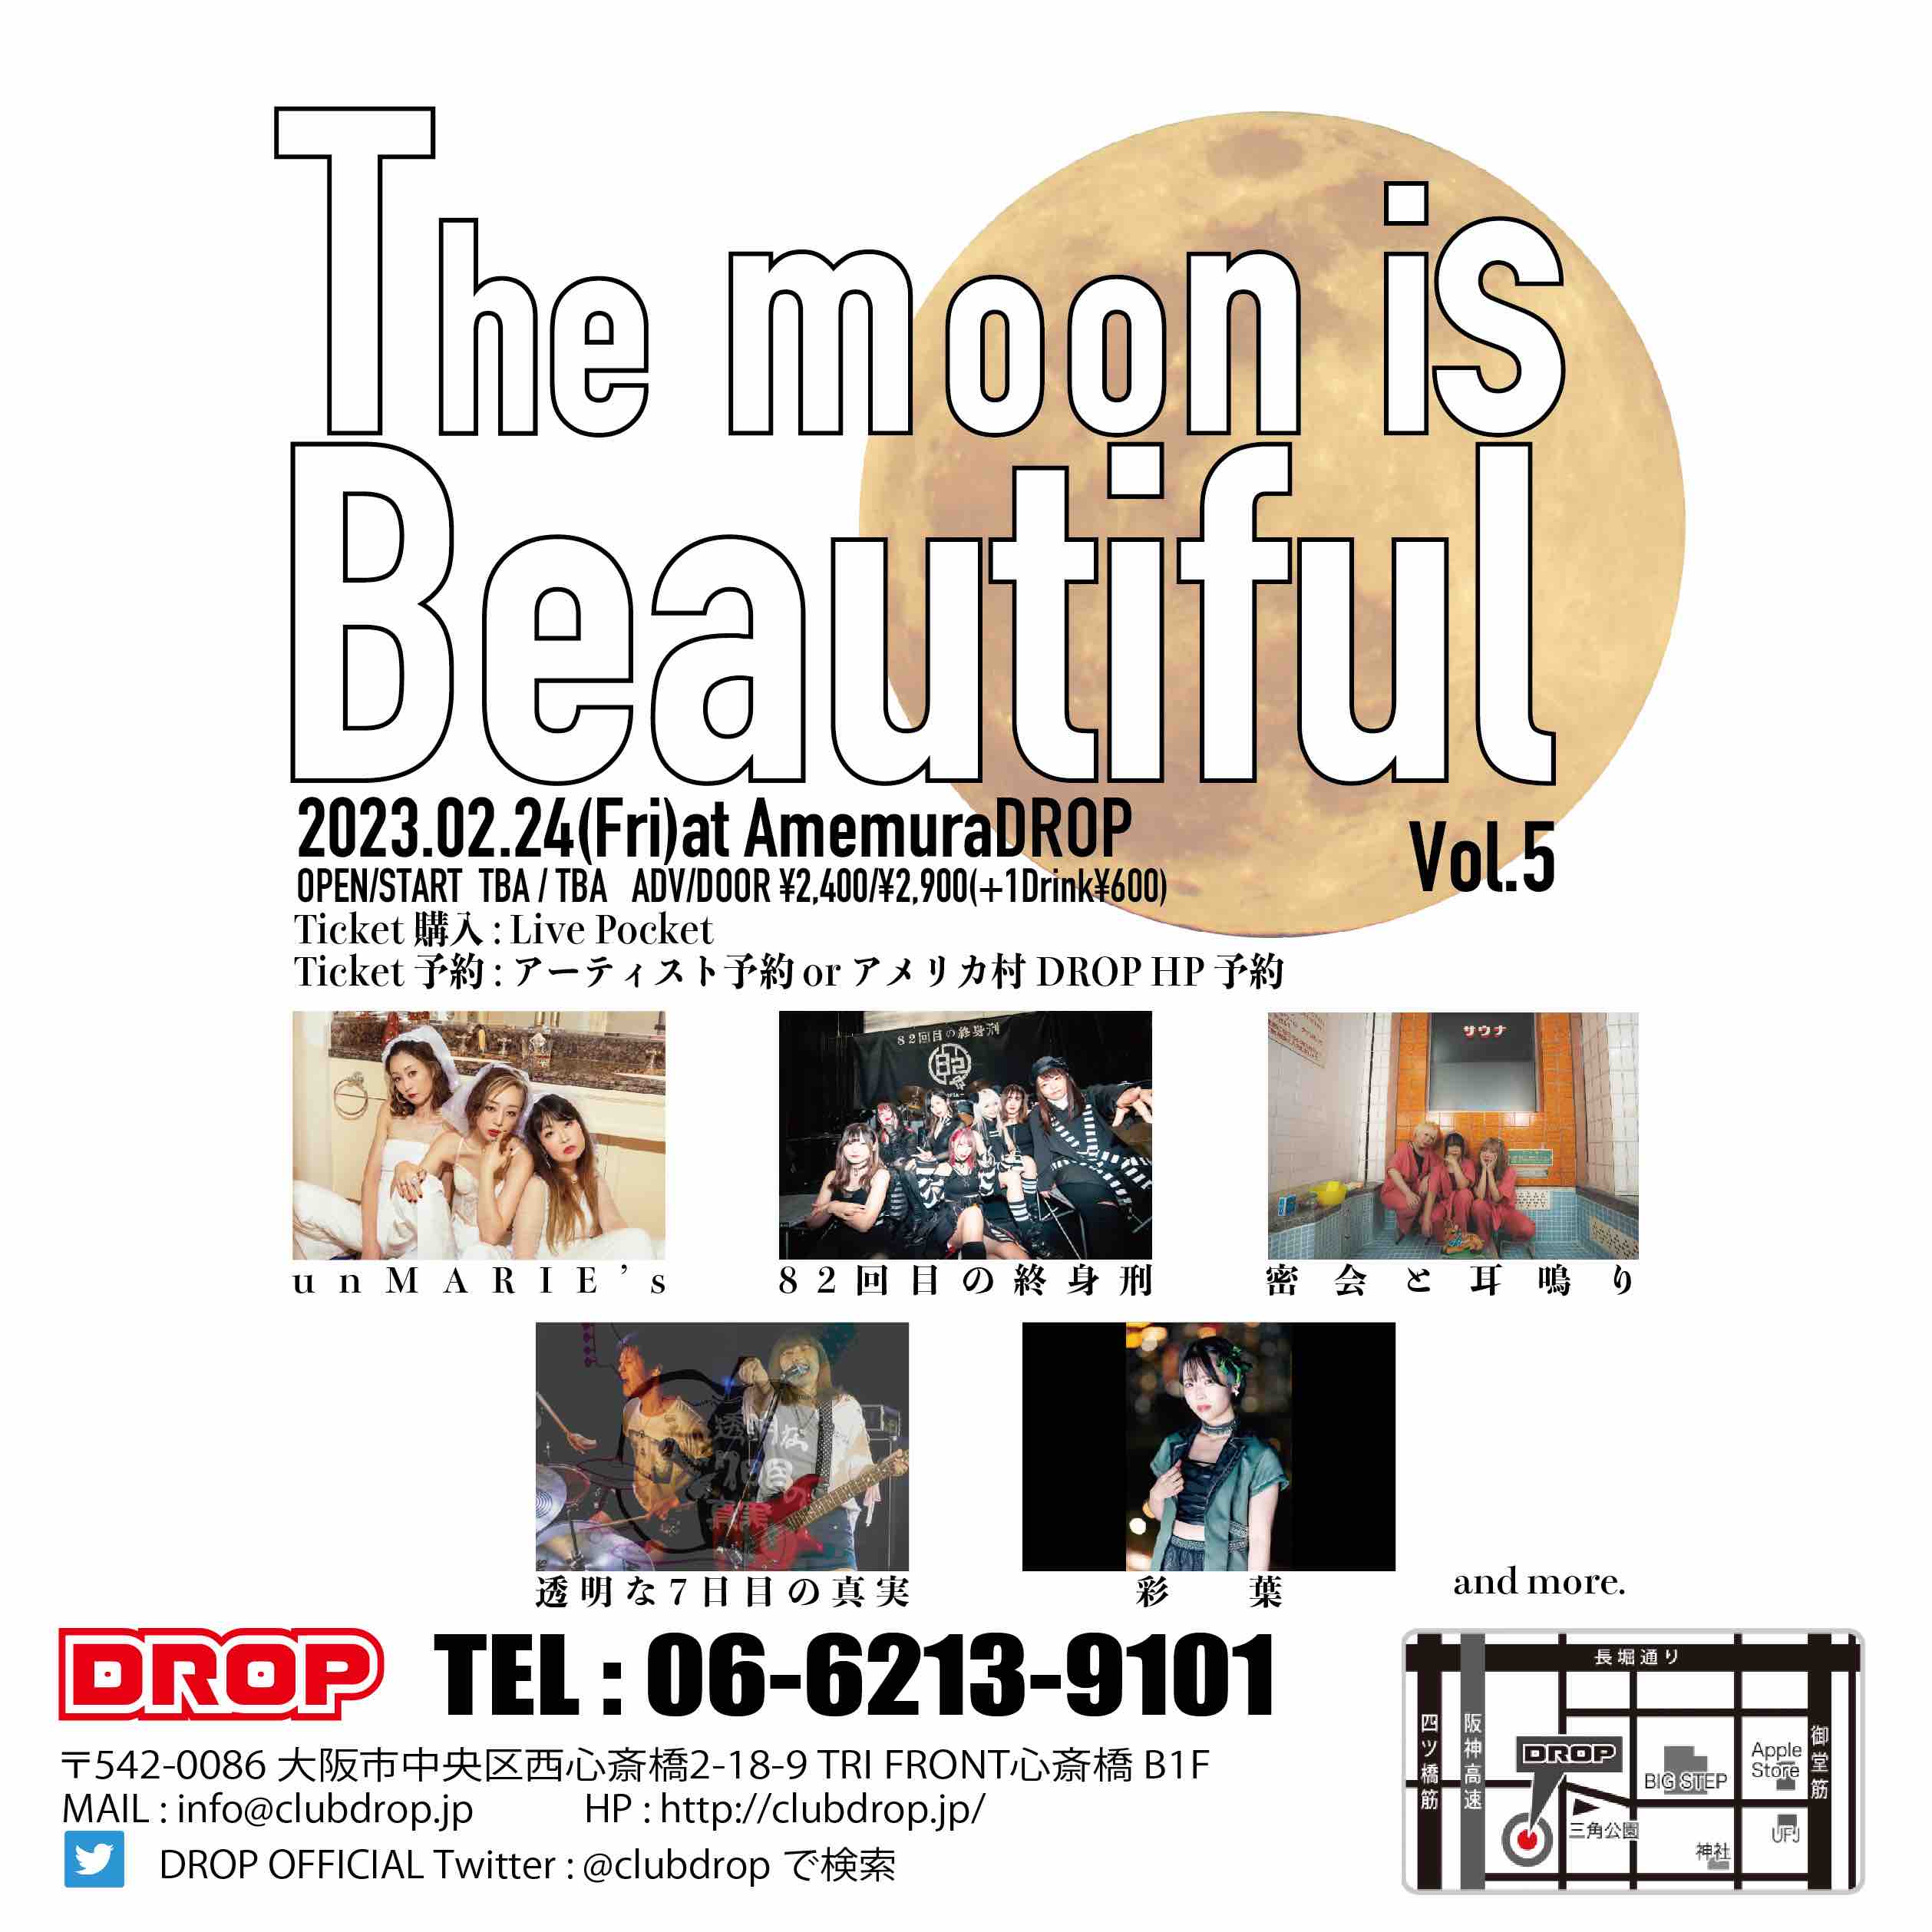 The moon is Beautiful vol.5